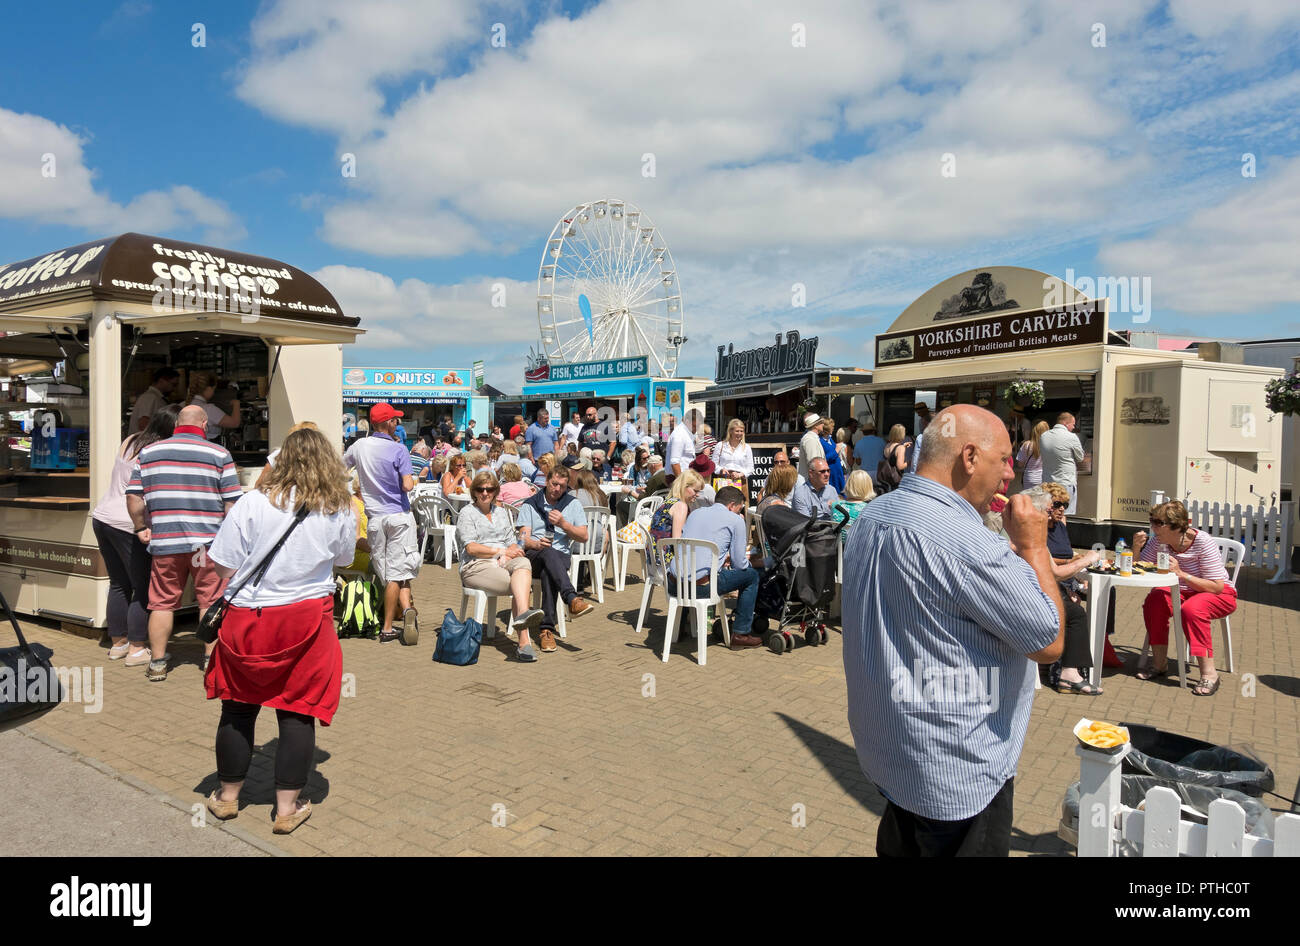 People eating and drinking at food stands at the Great Yorkshire Show in summer Harrogate North Yorkshire England UK United Kingdom GB Great Britain Stock Photo